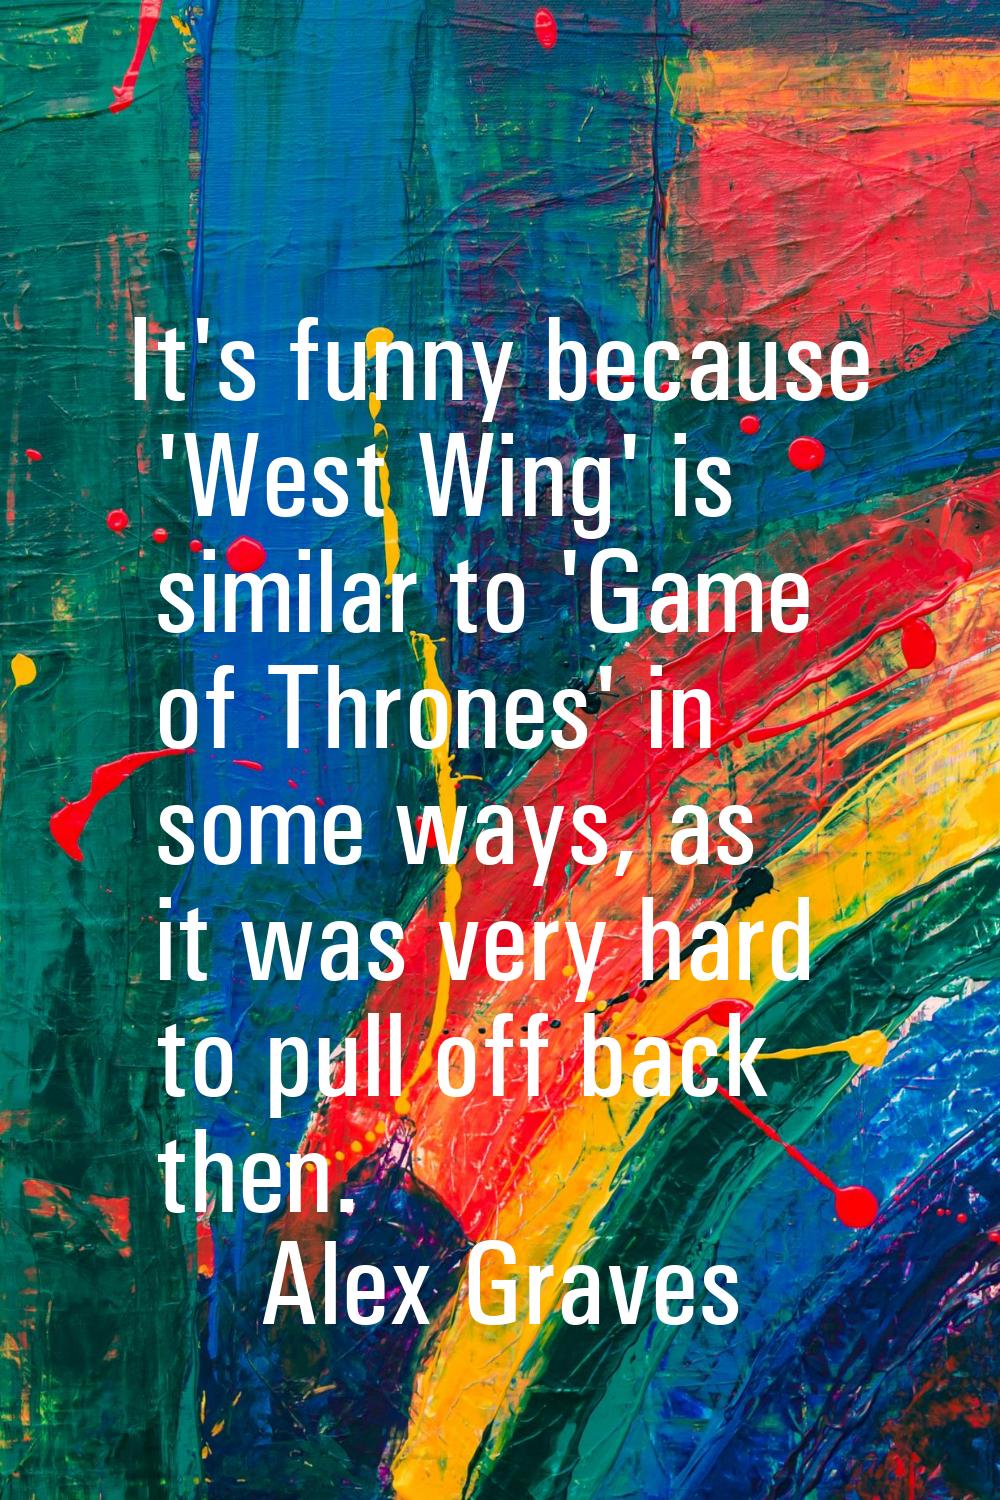 It's funny because 'West Wing' is similar to 'Game of Thrones' in some ways, as it was very hard to